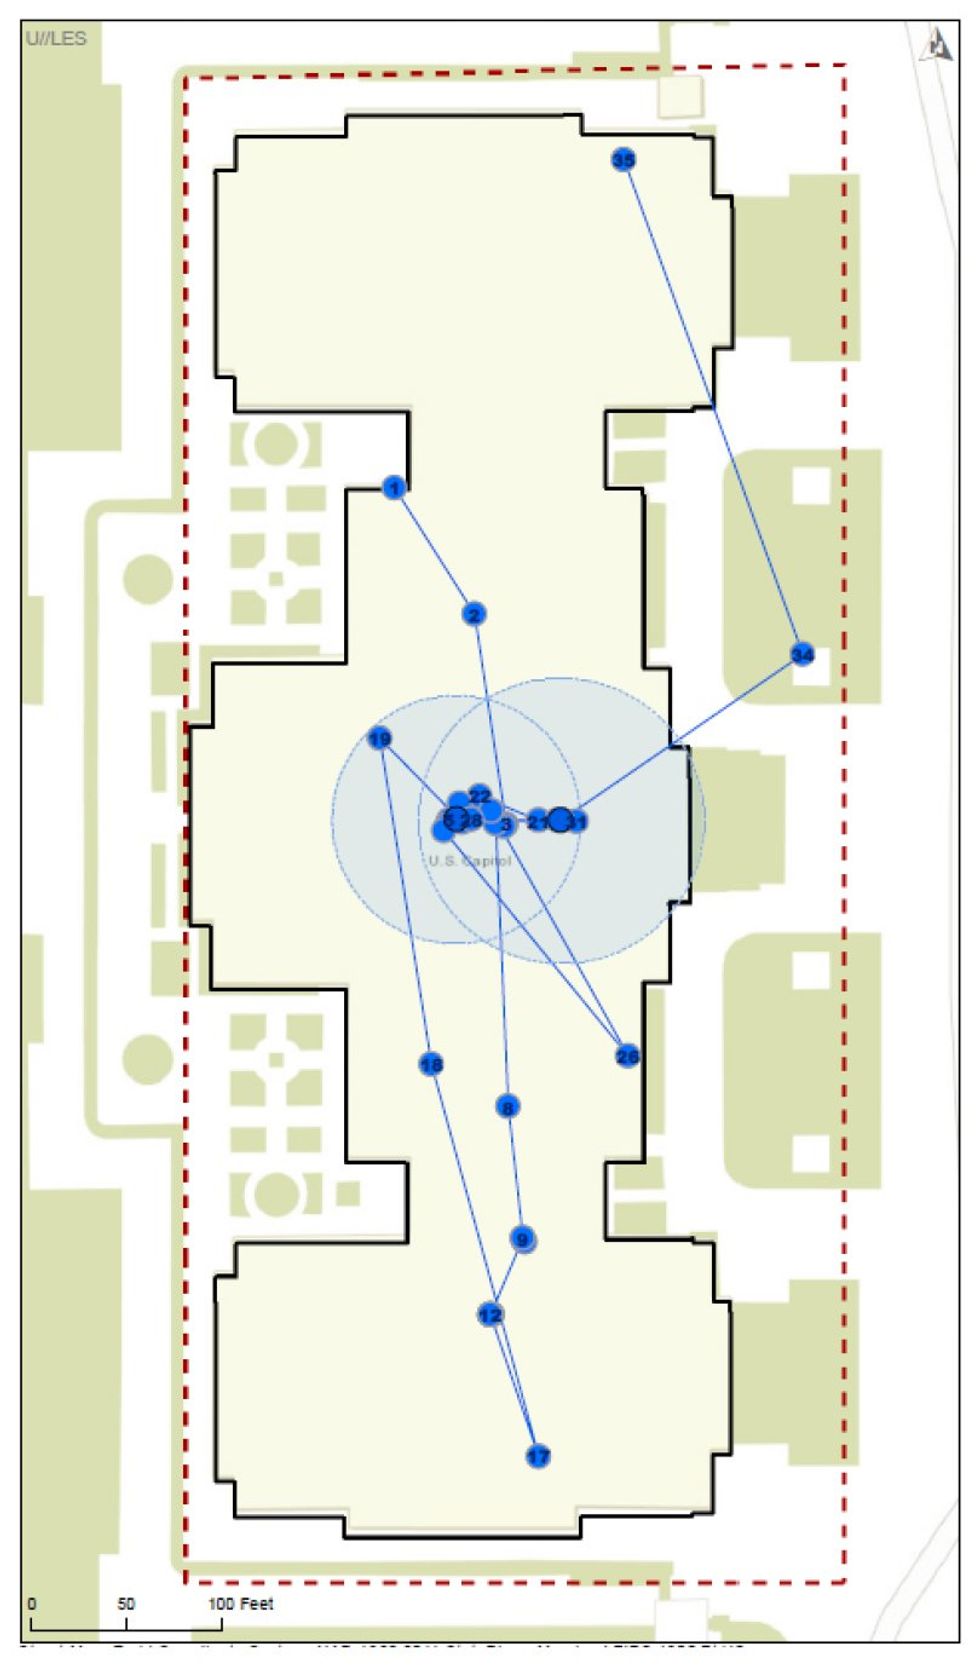 A map of the Capital Building showing criss crossing blue dots and lines.